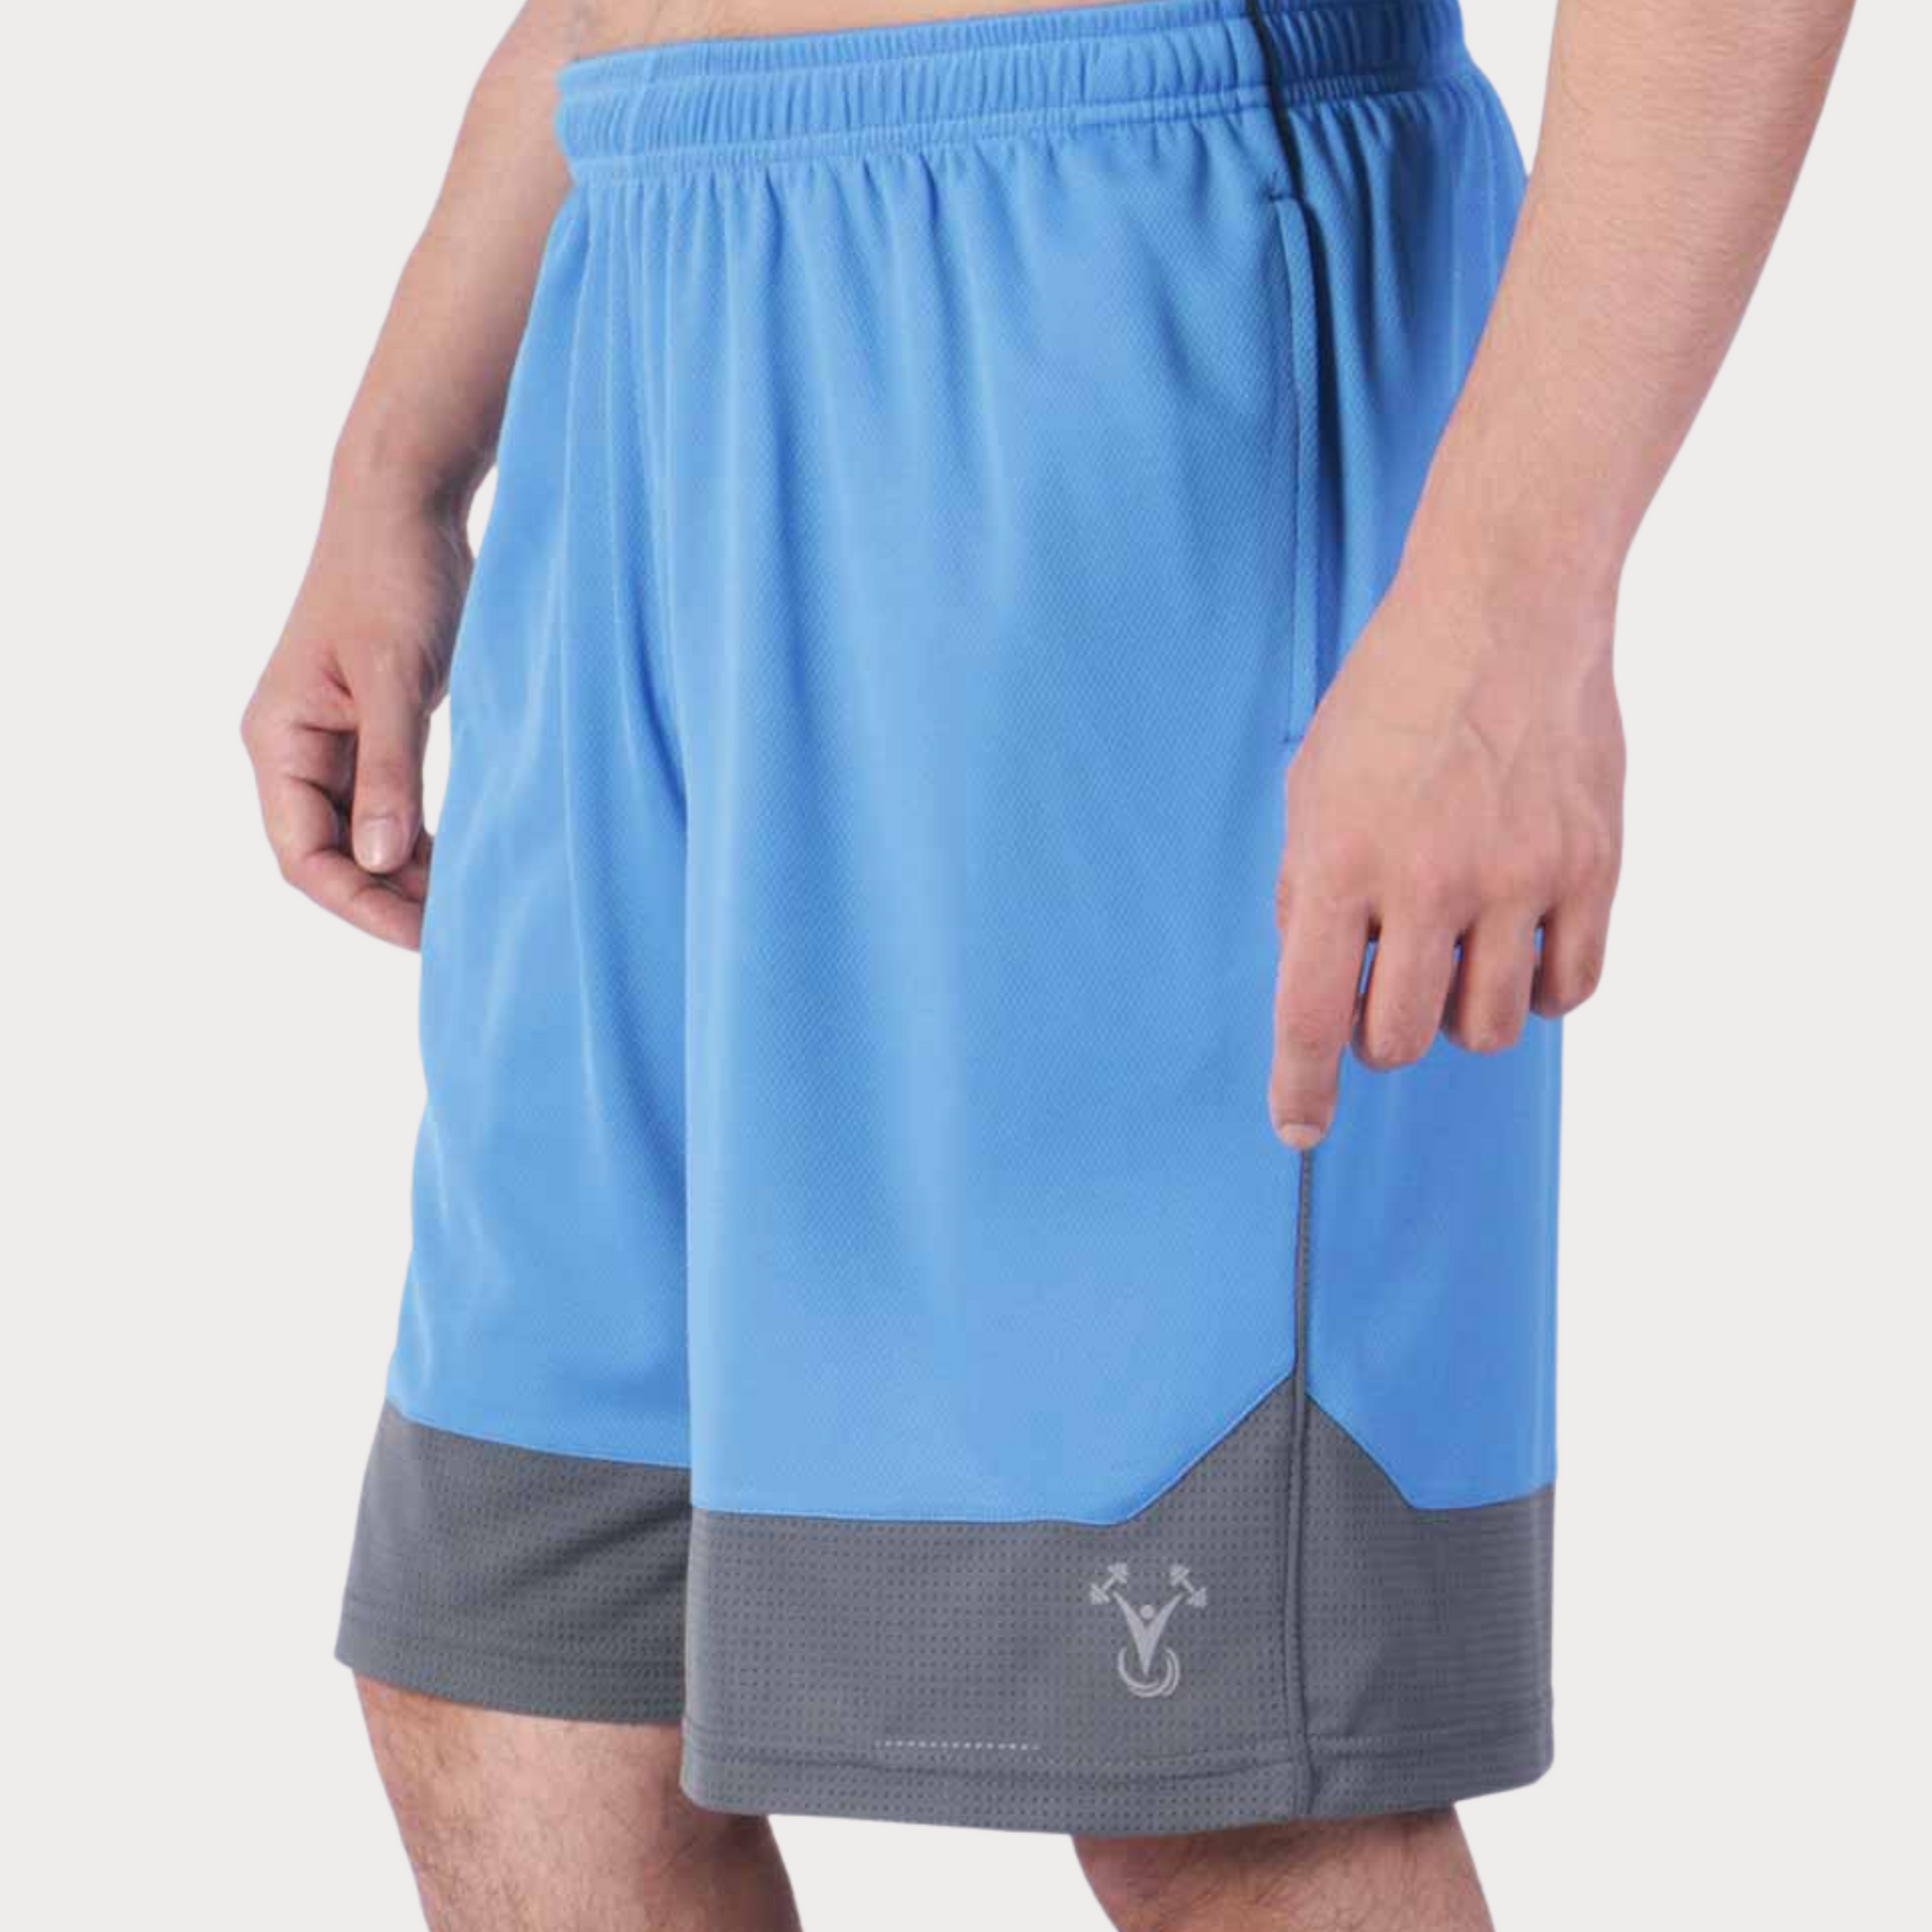 Shorts Activewear / Sportswear - Men's Classic Textured Loose Fit Shorts - S / Sports Blue - Outperformer